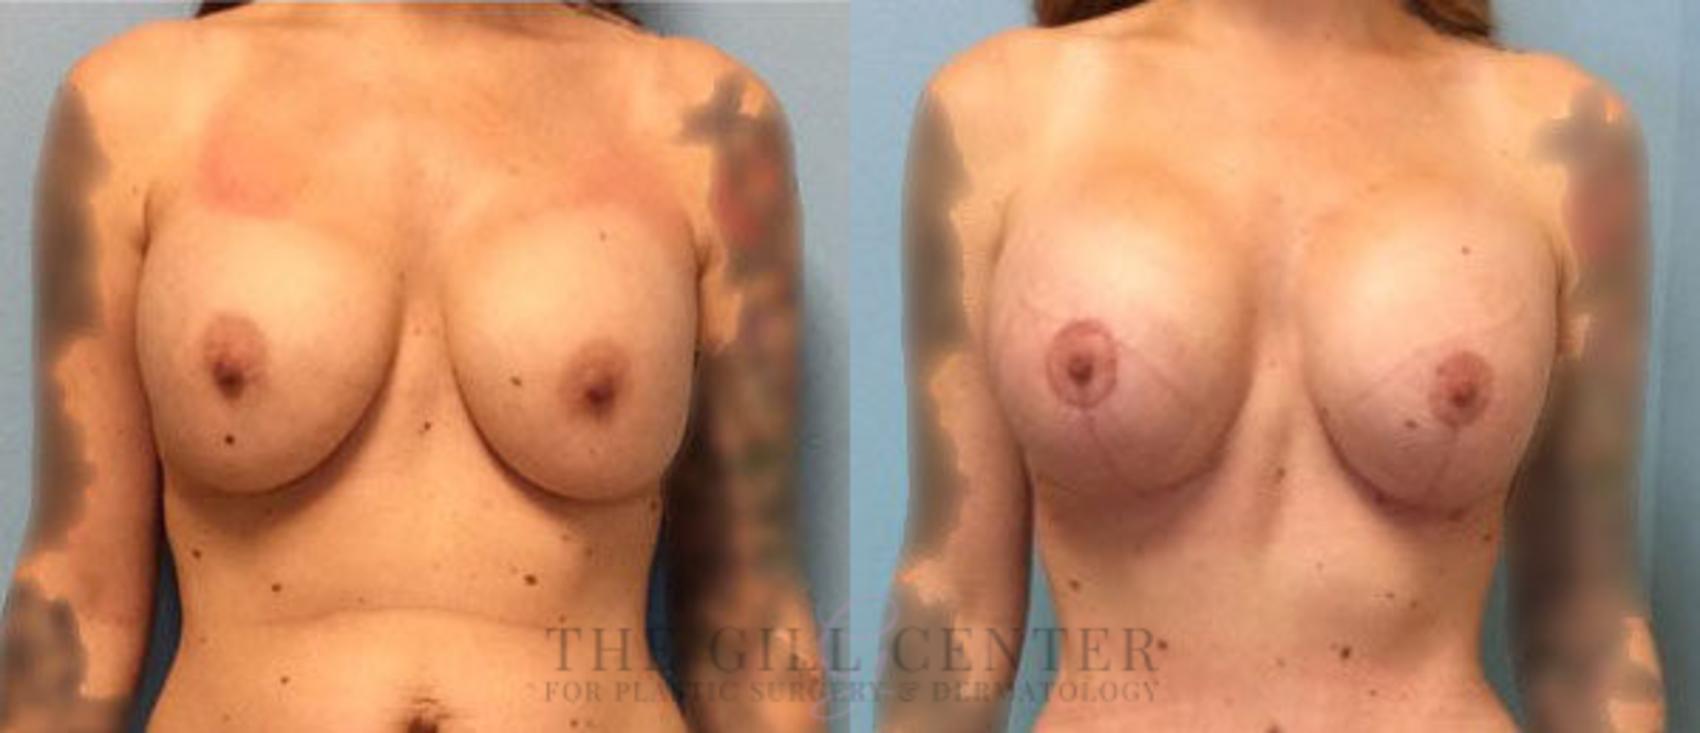 Breast Revisions Case 376 Before & After Front | The Woodlands, TX | The Gill Center for Plastic Surgery and Dermatology